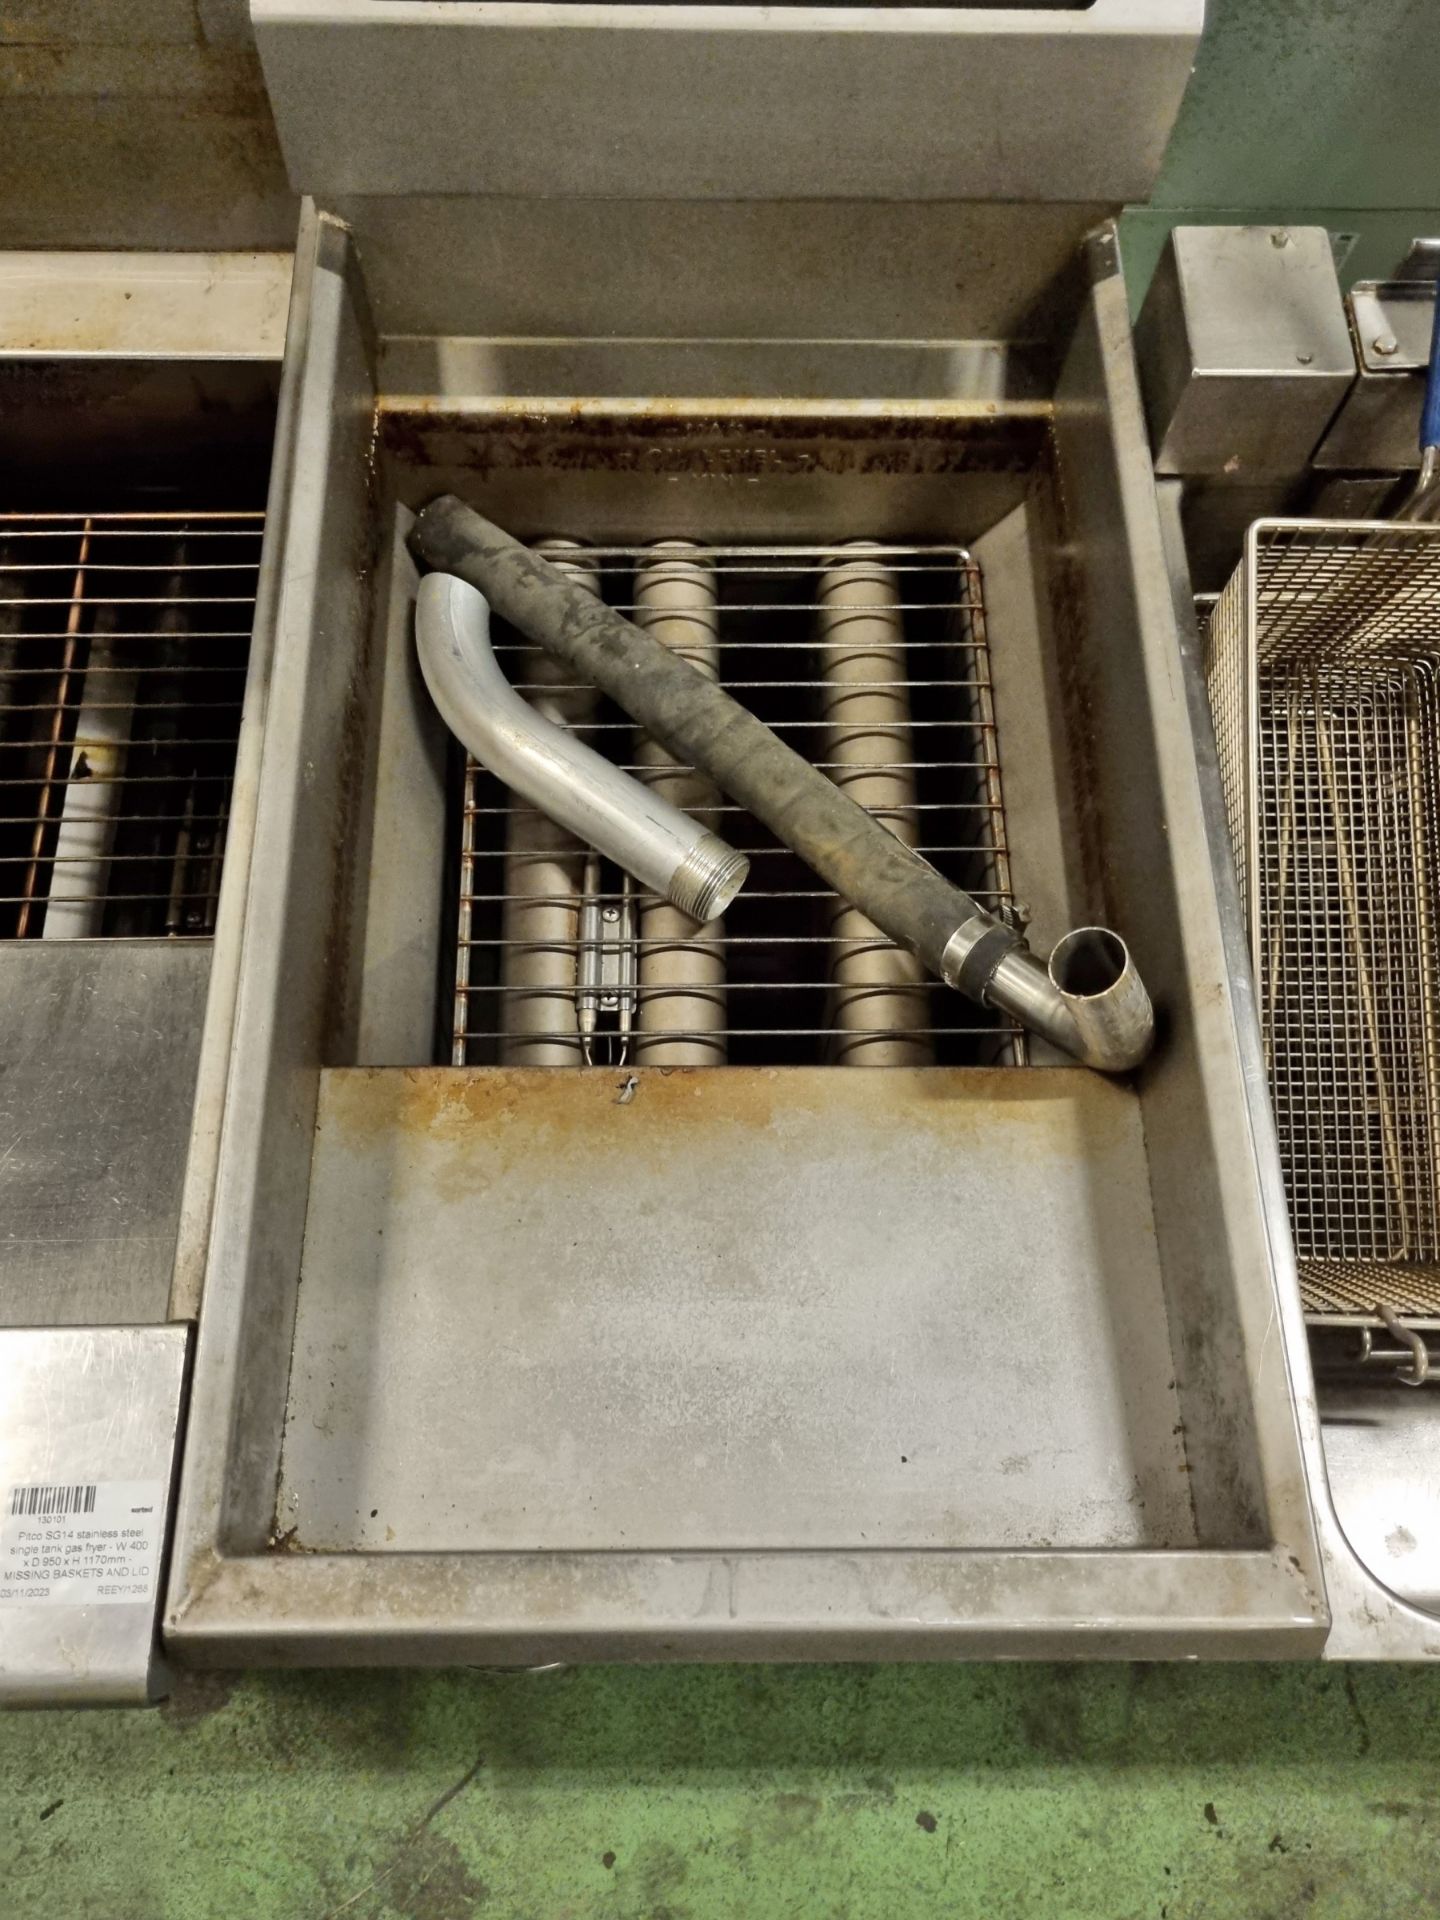 Pitco 35C+ stainless steel single tank gas fryer - W 400 x D 800 x H 1170mm - MISSING BASKETS - Image 3 of 5